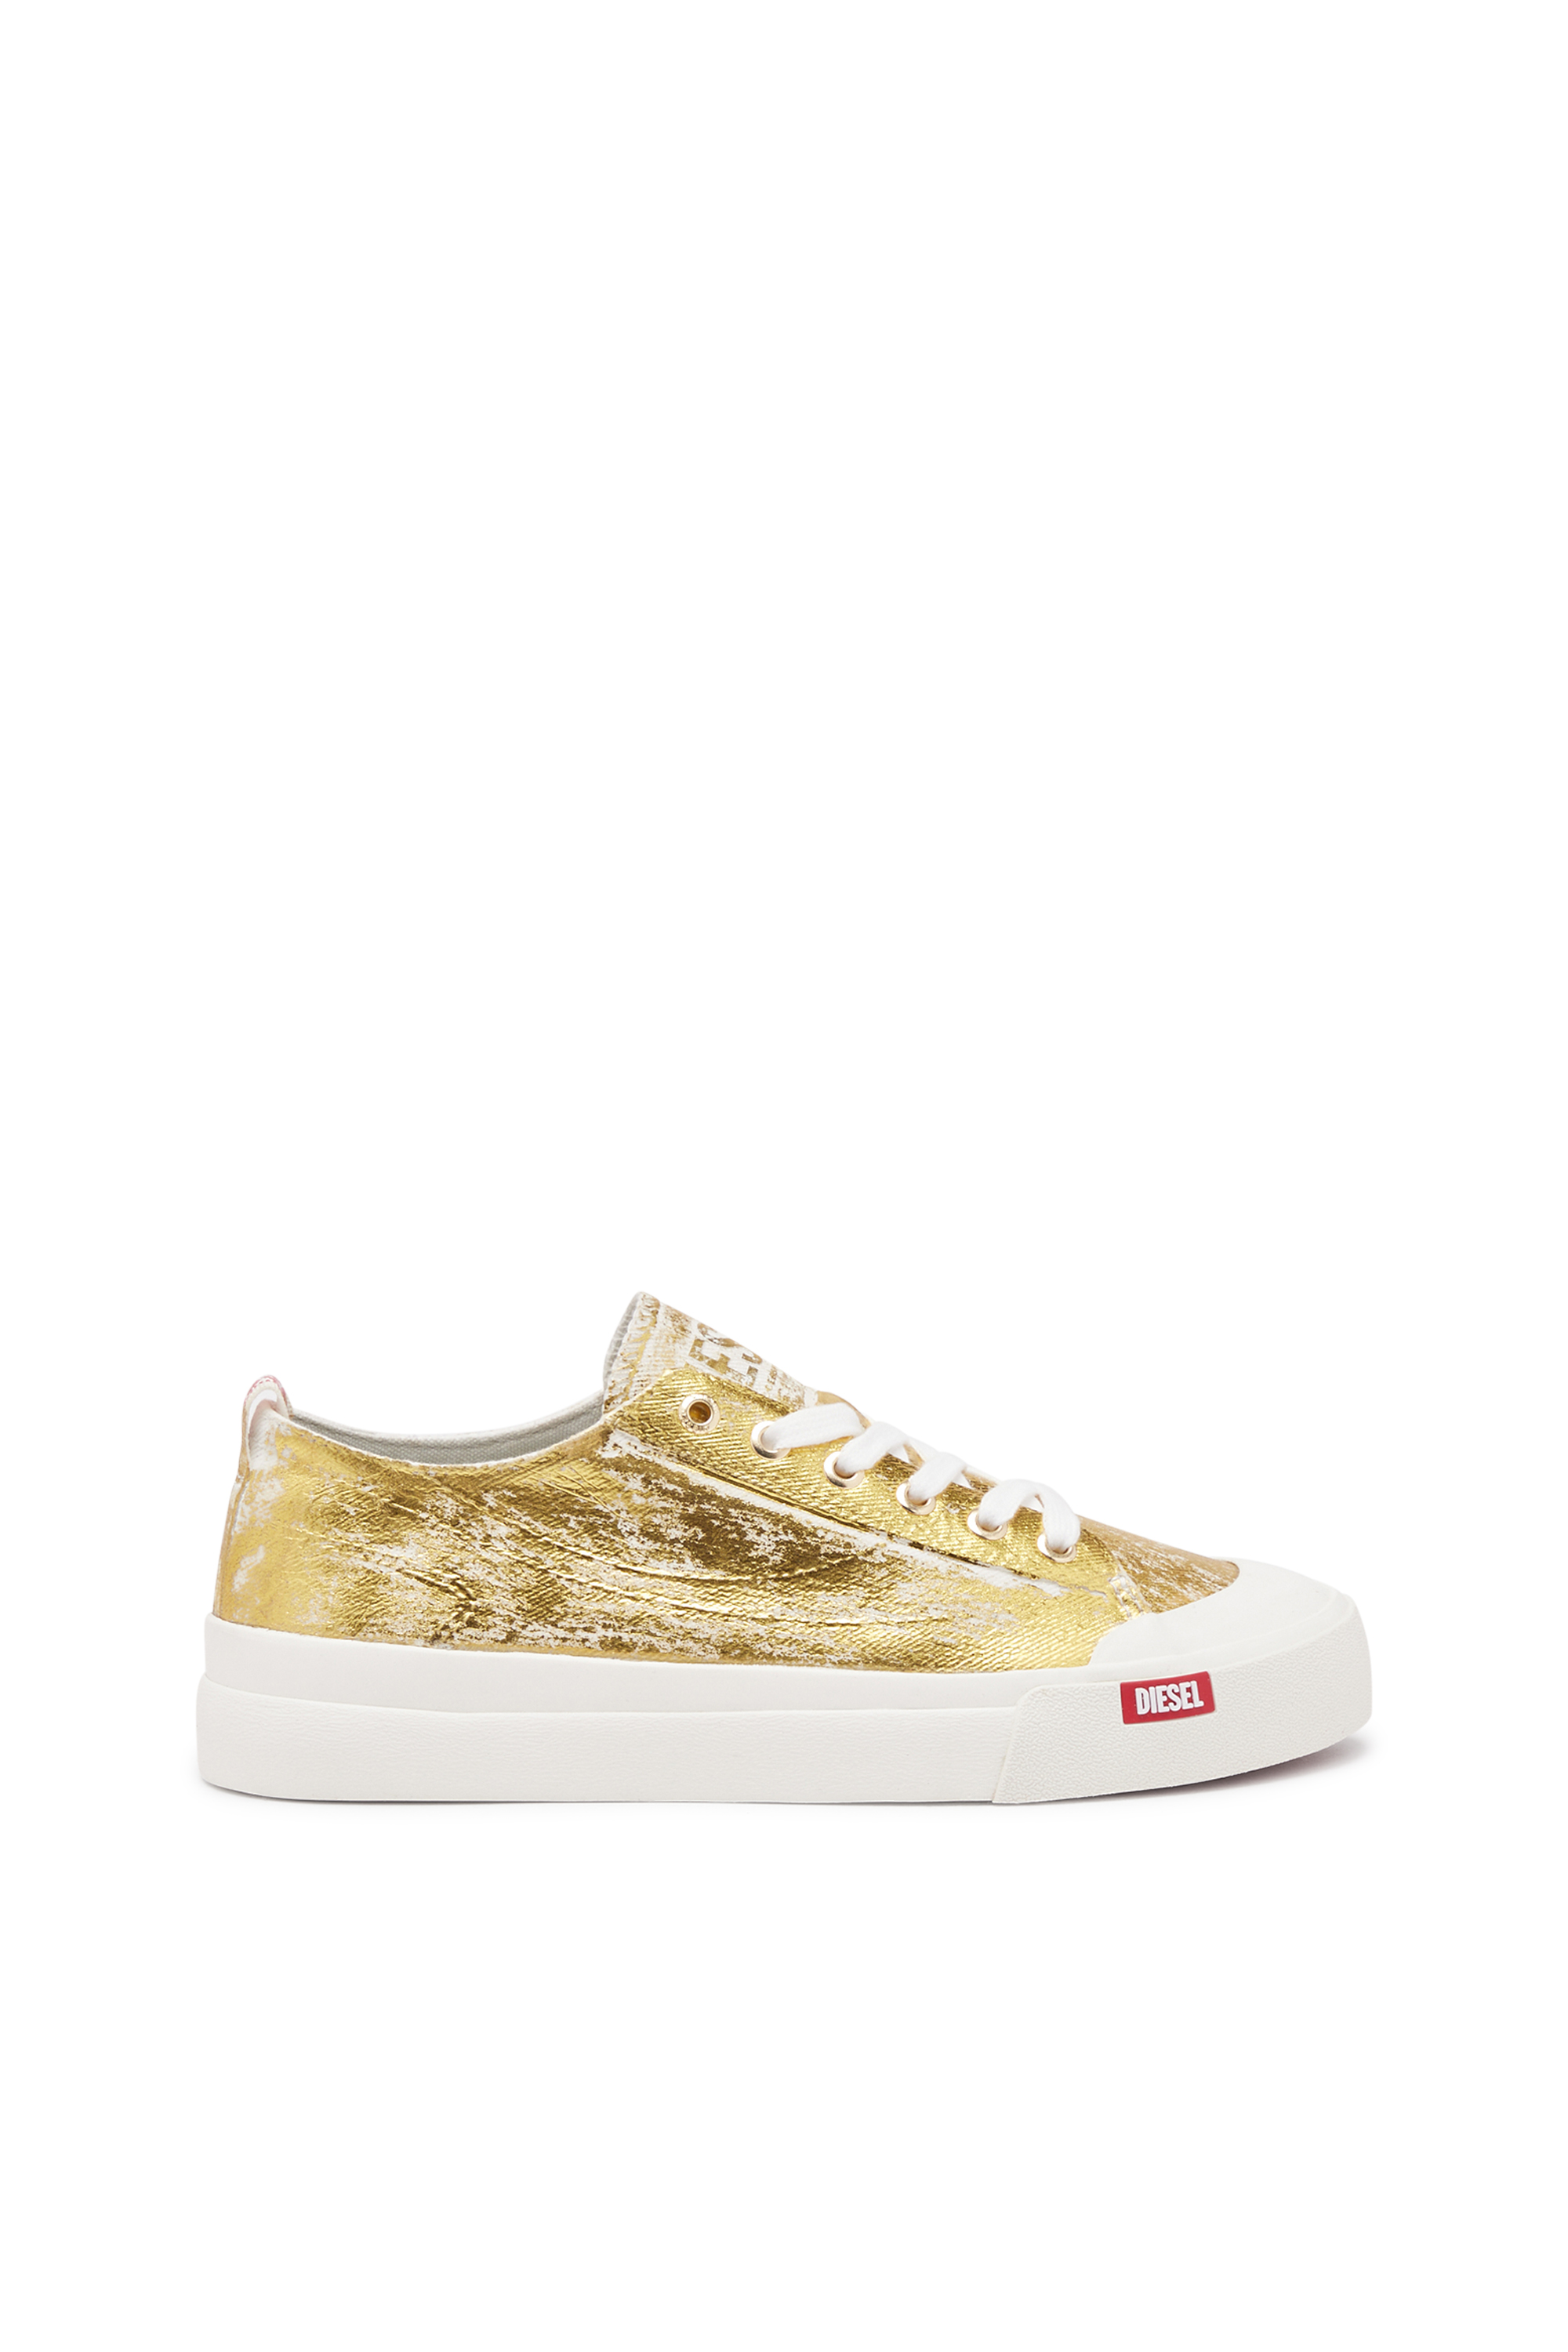 Diesel - S-ATHOS LOW W, Woman S-Athos Low-Distressed sneakers in metallic canvas in Oro - Image 1